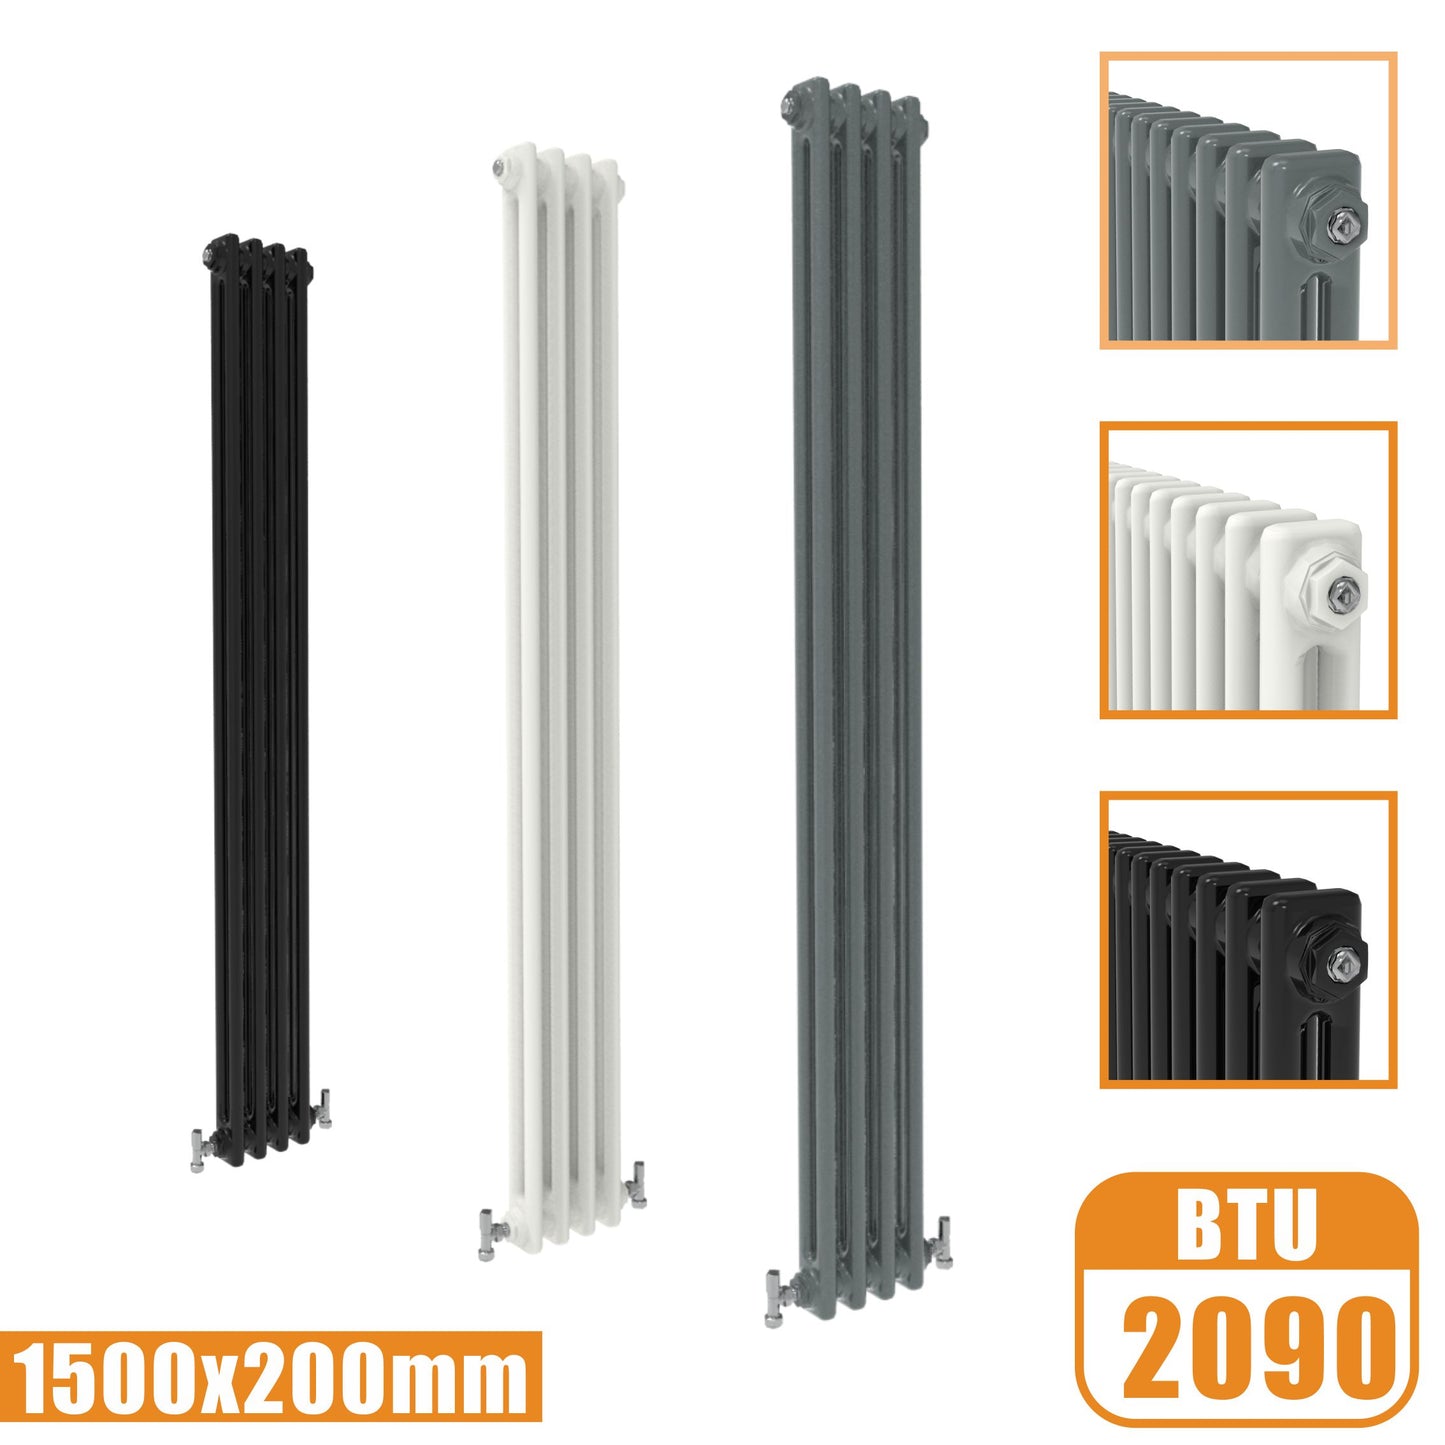 2Column Traditional Cast Iron Style 1500x200 Radiator Vertical Tall Vintage AICA Rads